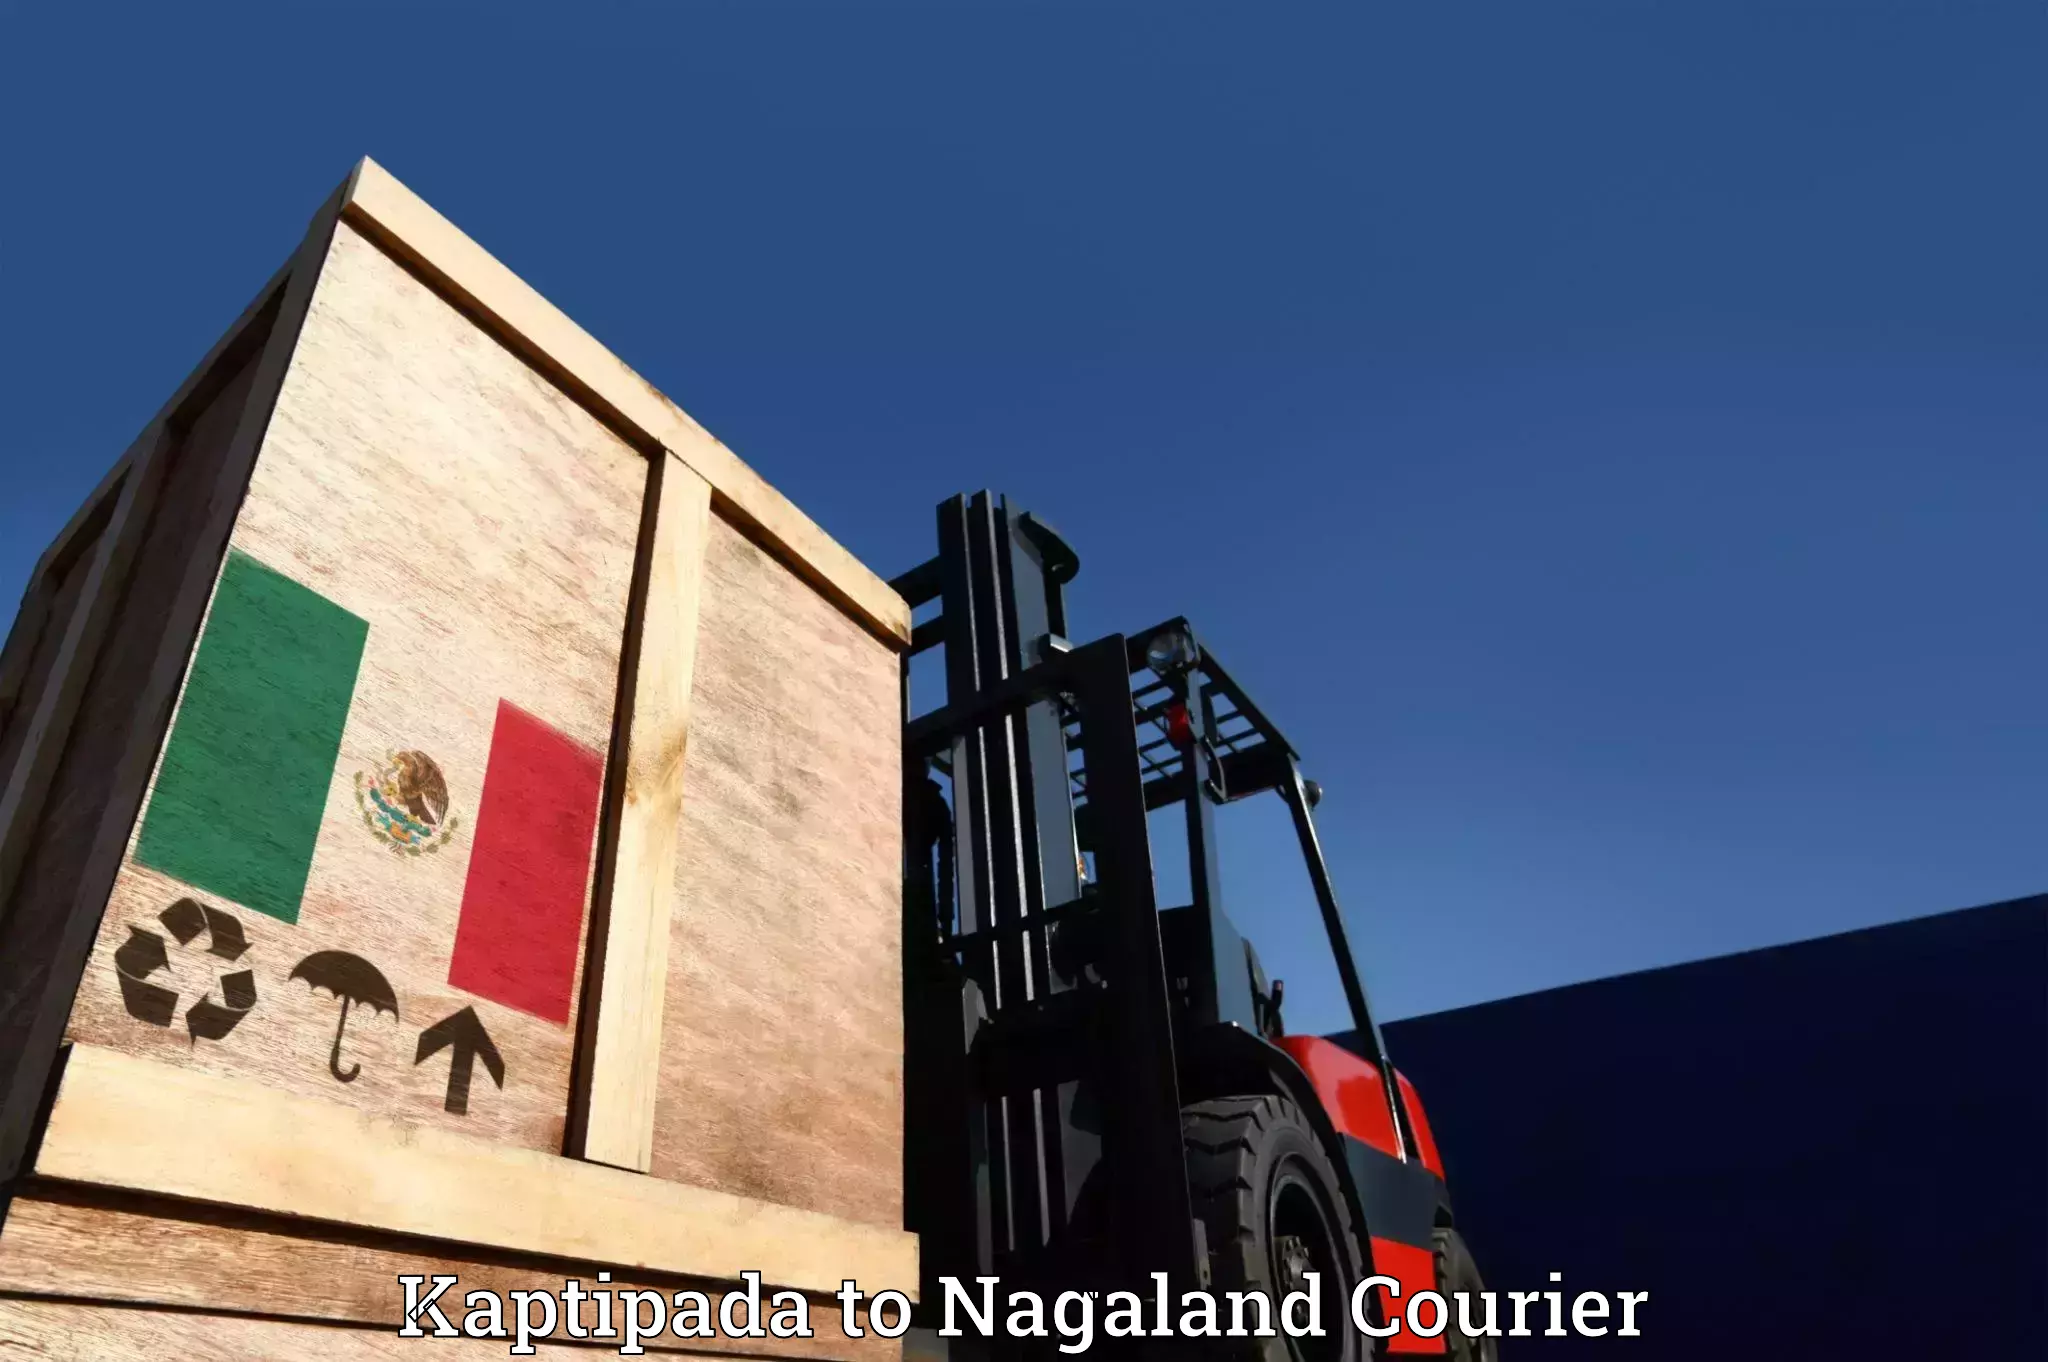 Quality relocation assistance in Kaptipada to Nagaland